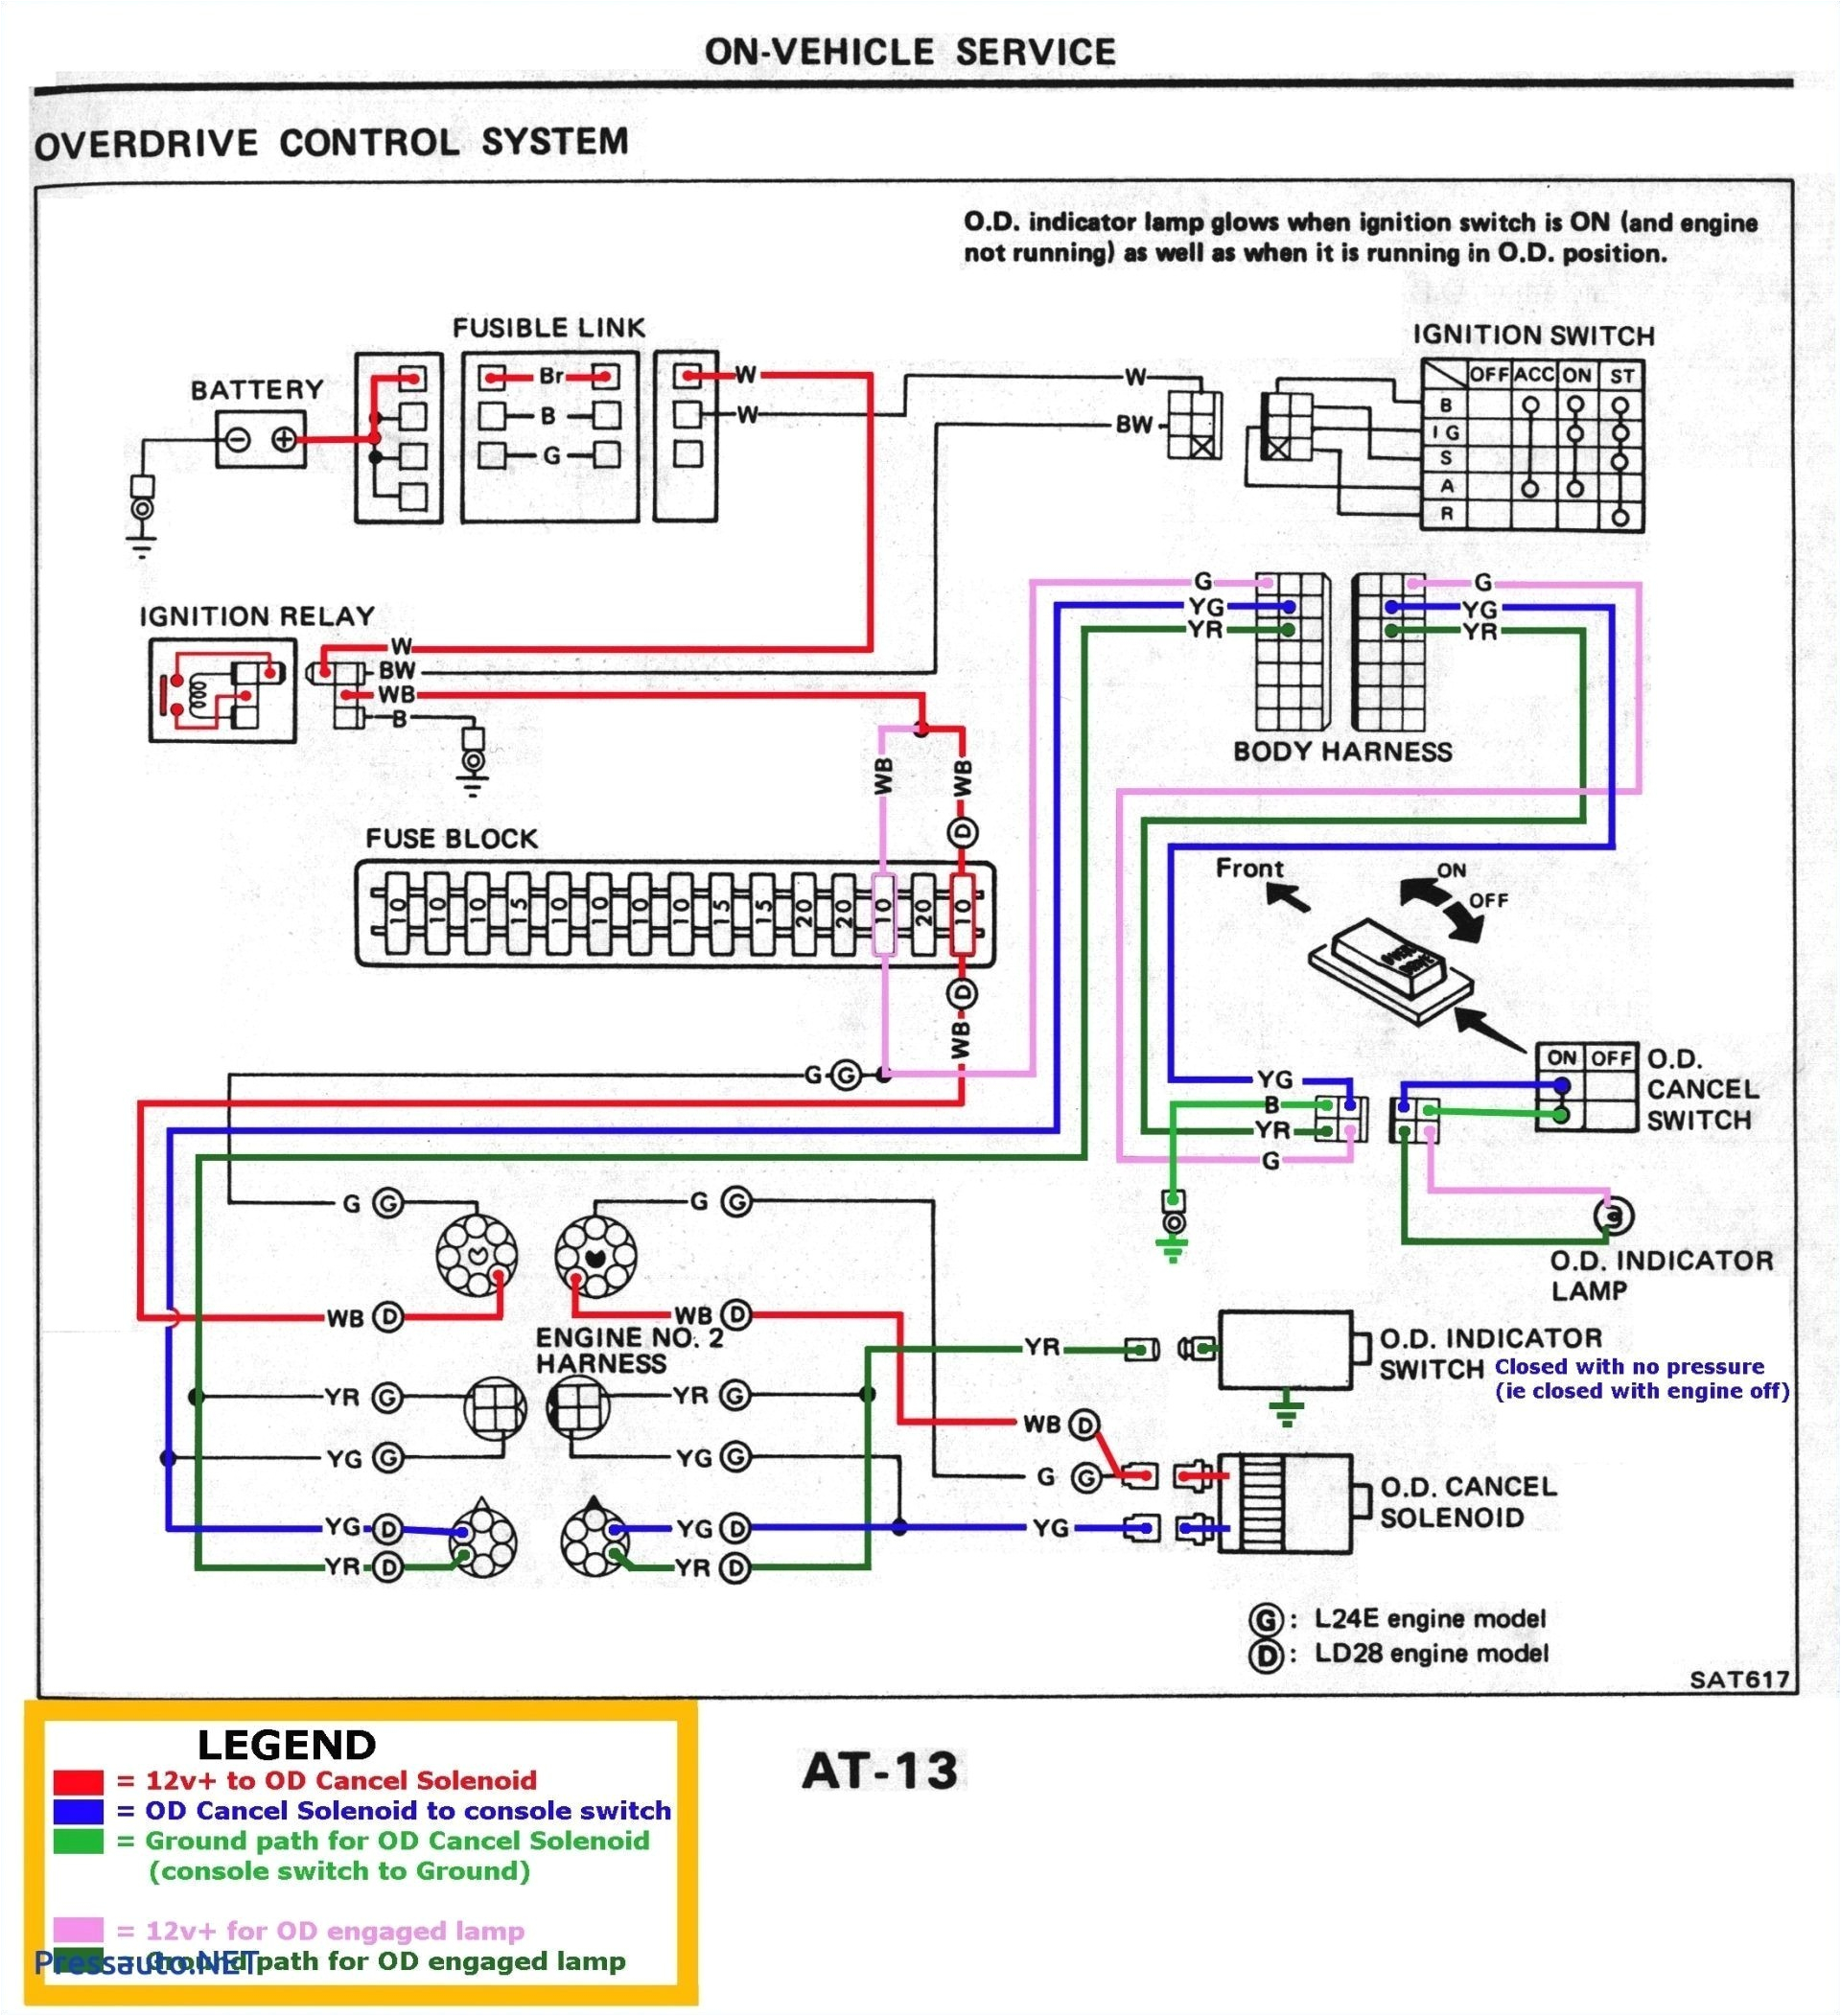 clothes dryer wiring diagram wiring diagram for ge dryer motor save hotpoint dryer timer wiring of clothes dryer wiring diagram jpg